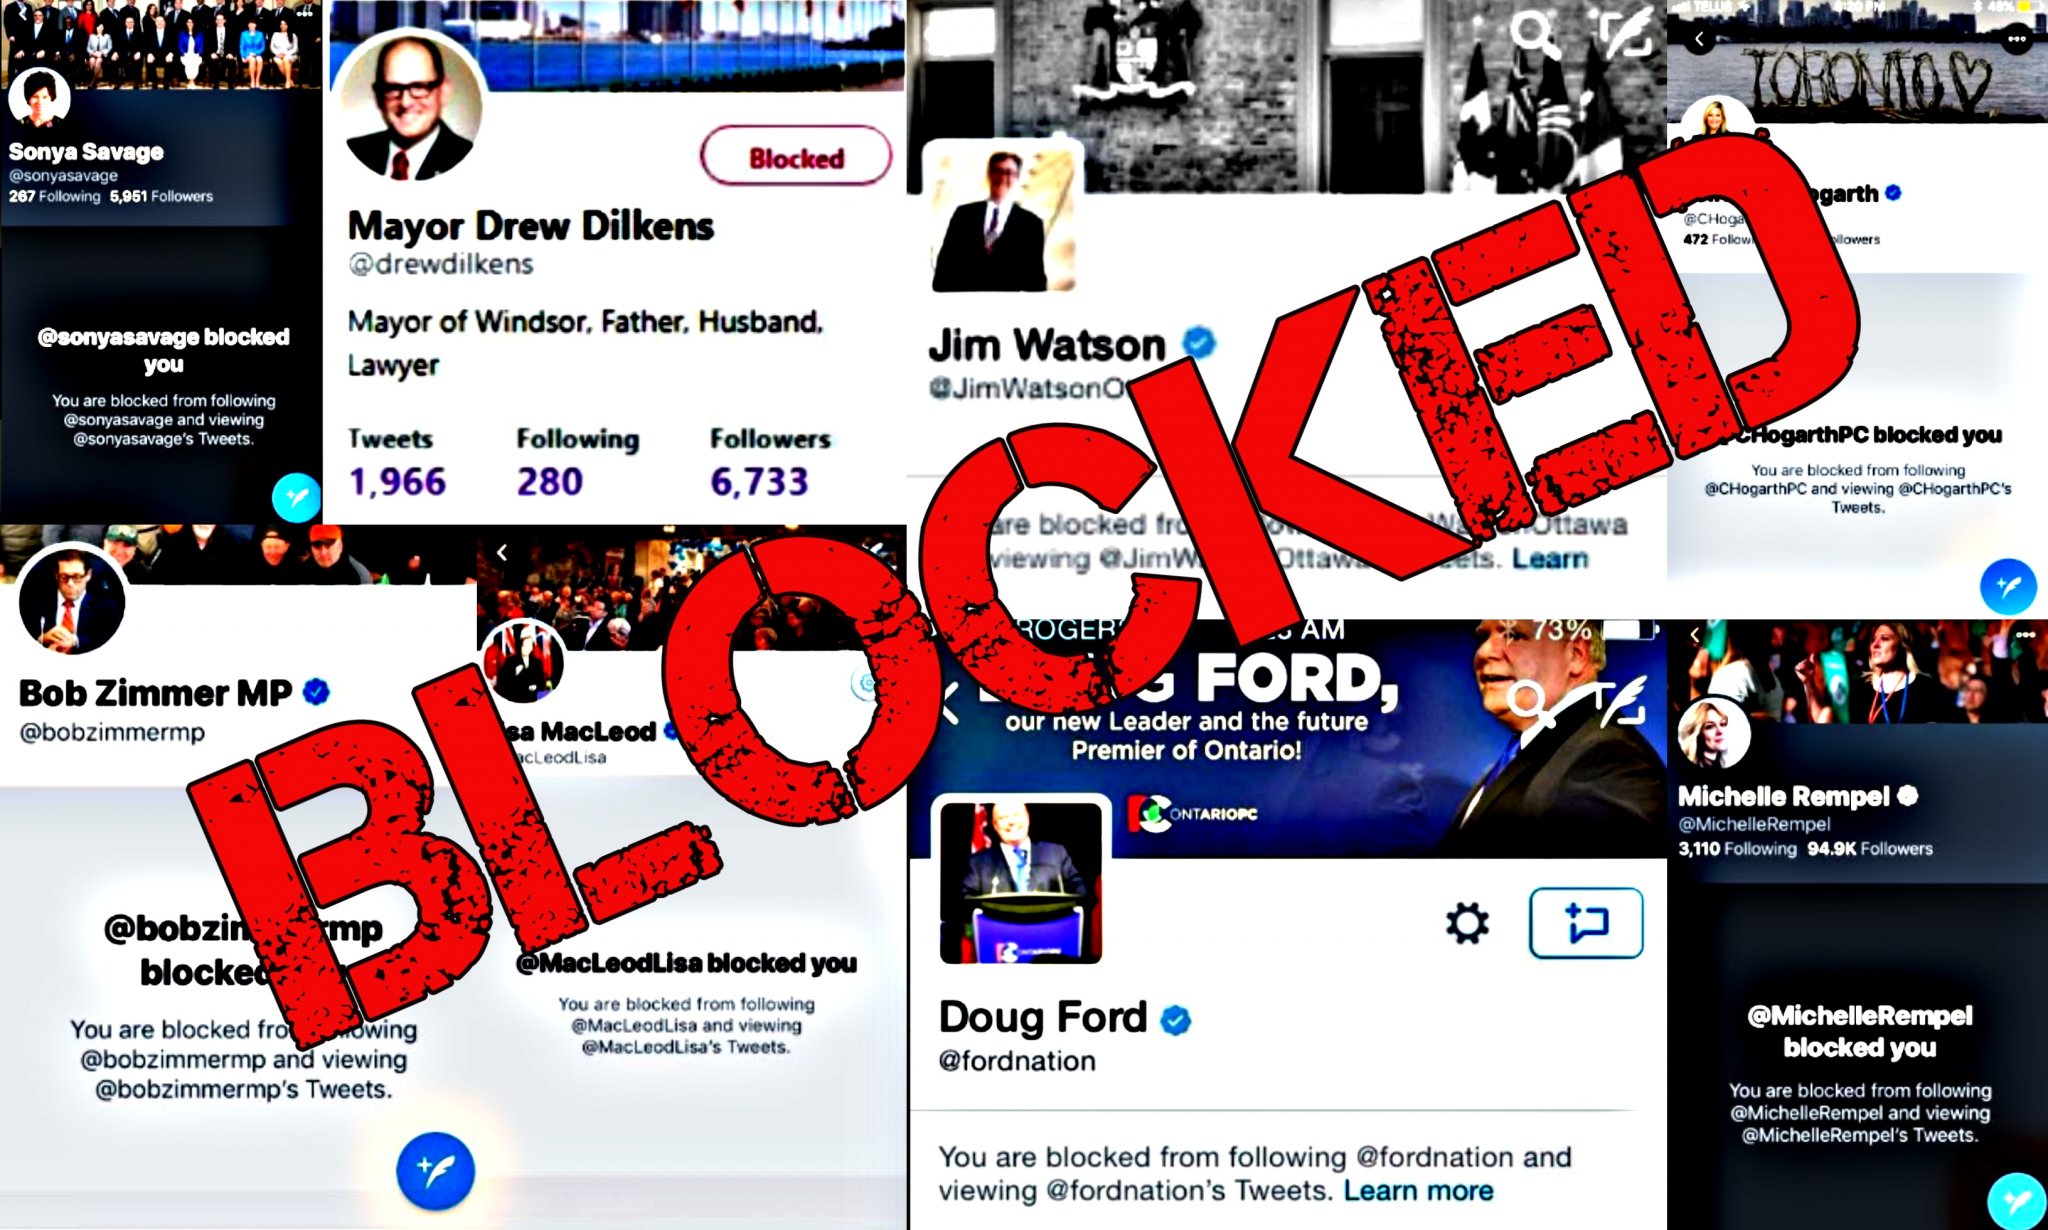 NATIONAL OBSERVER: Politicians can block you on Twitter. But should they?